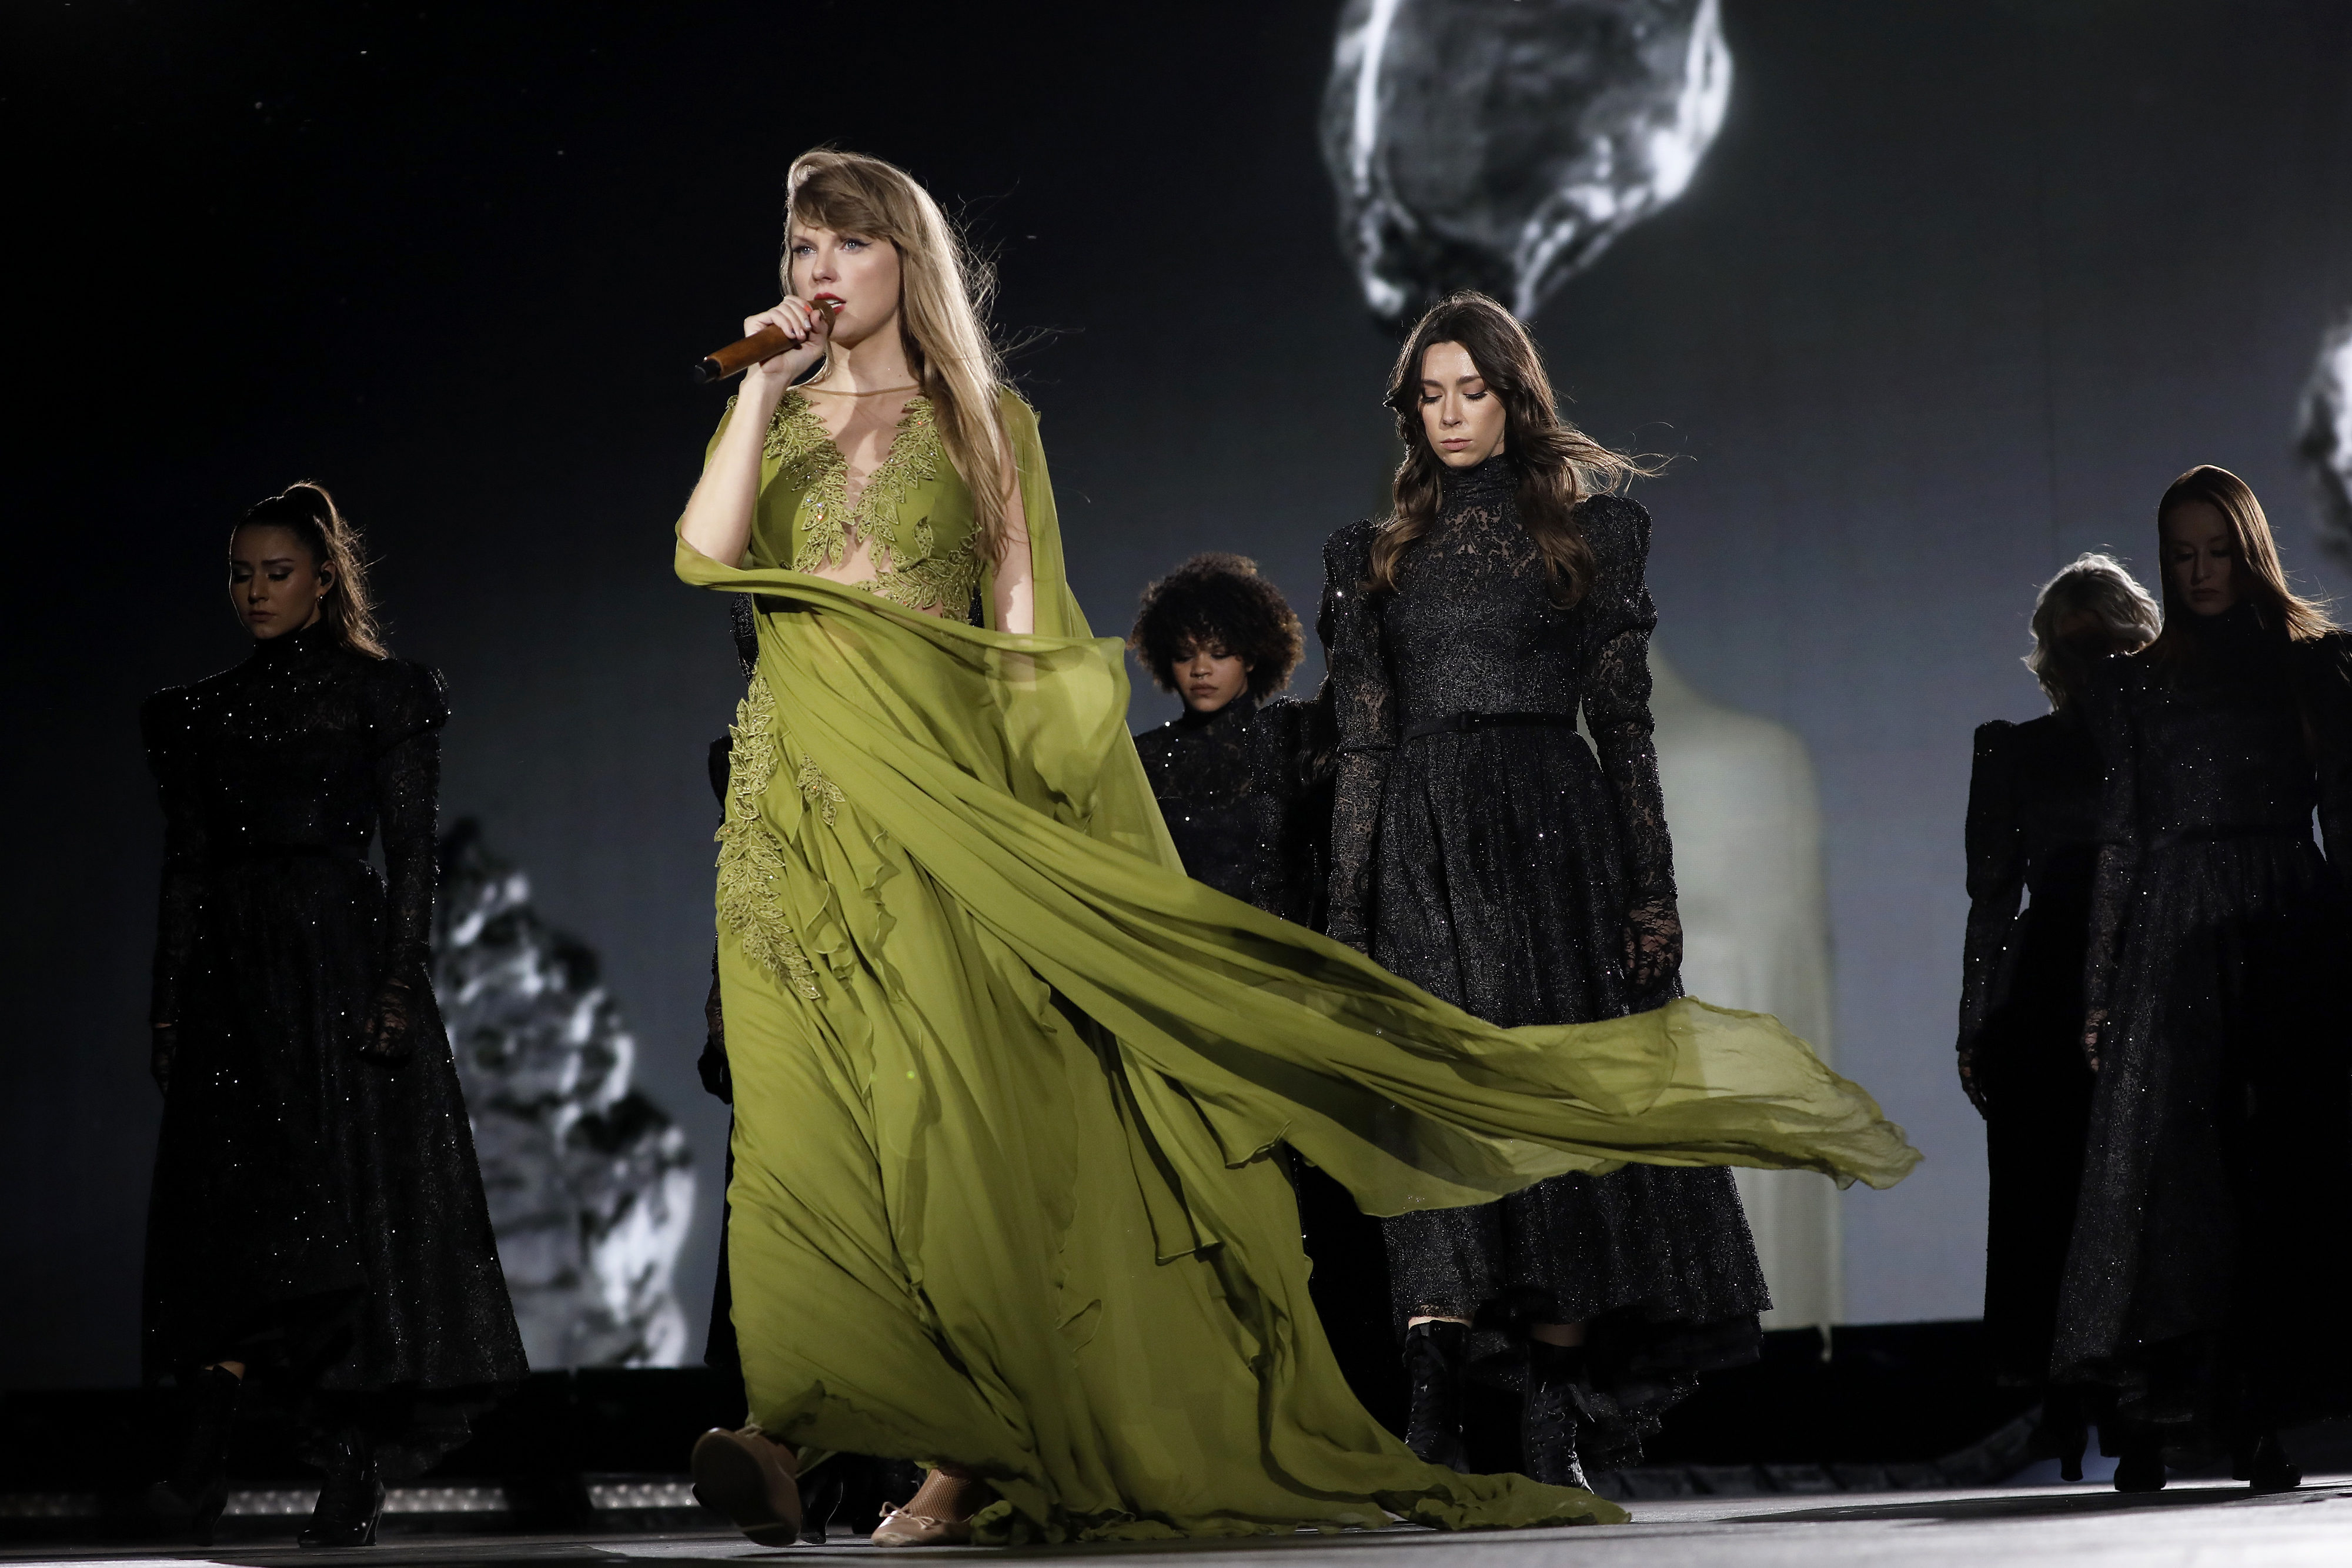 Taylor Swift performing in a green dress during The Eras Tour